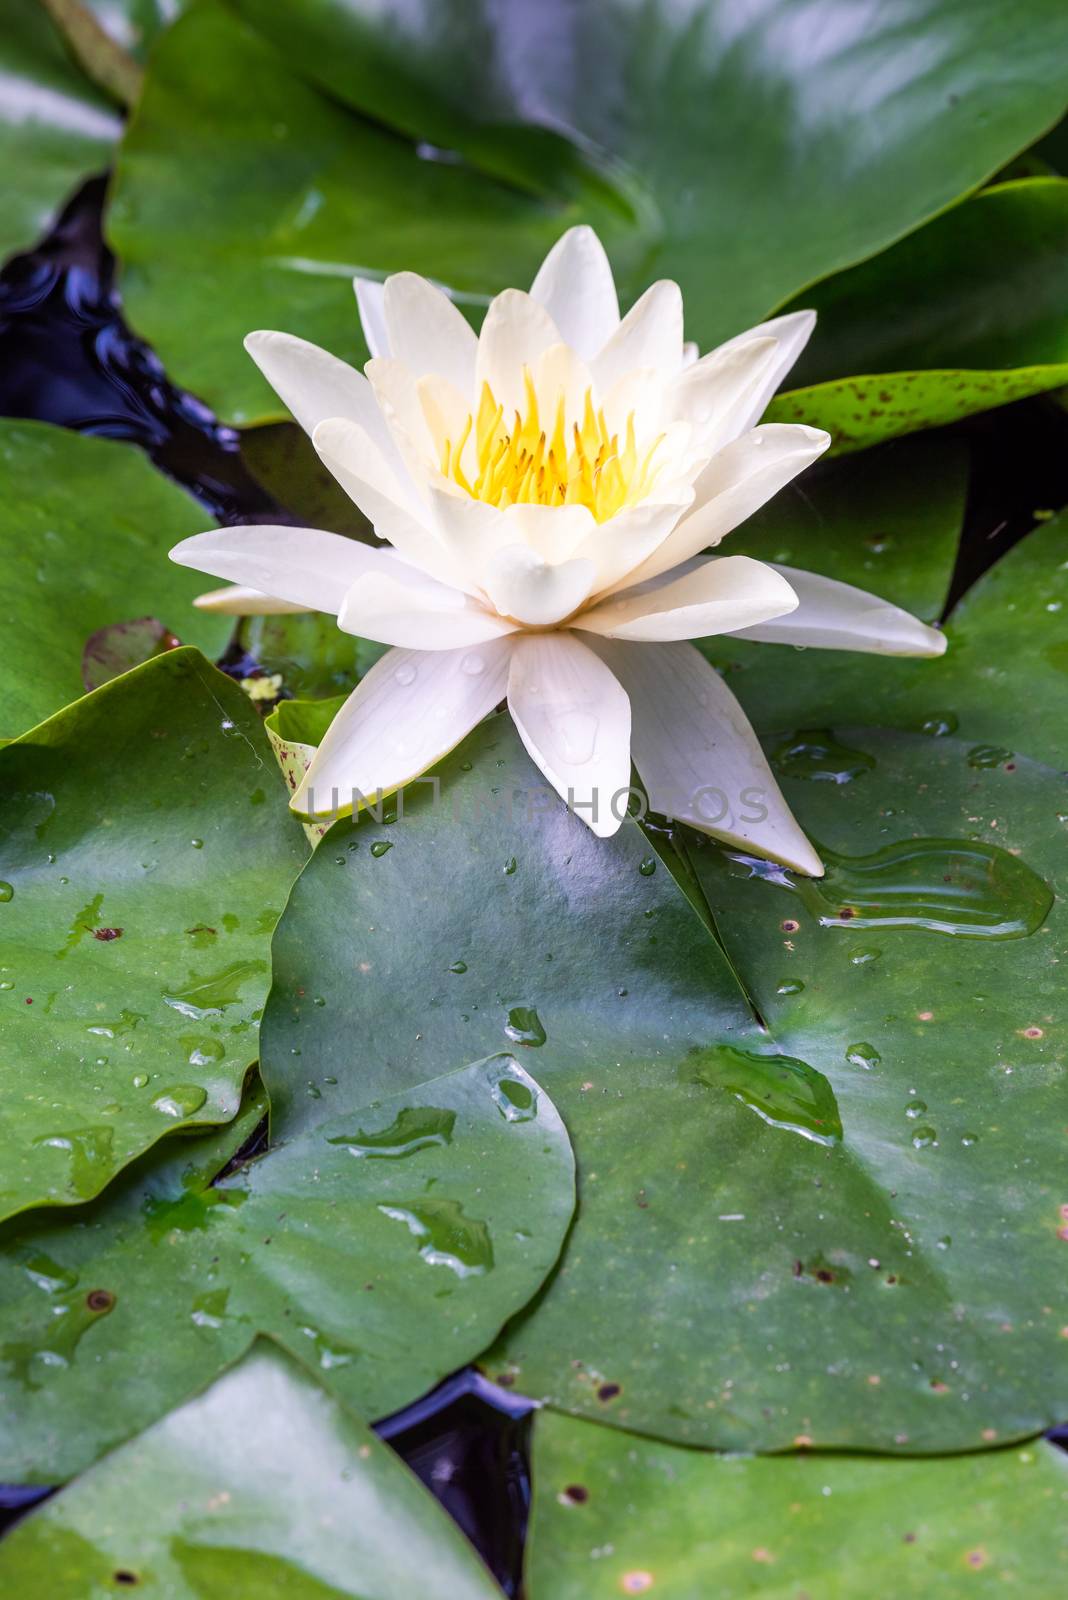 White lotus water lily flowert in a pond, Chengdu, Sichuan province, China